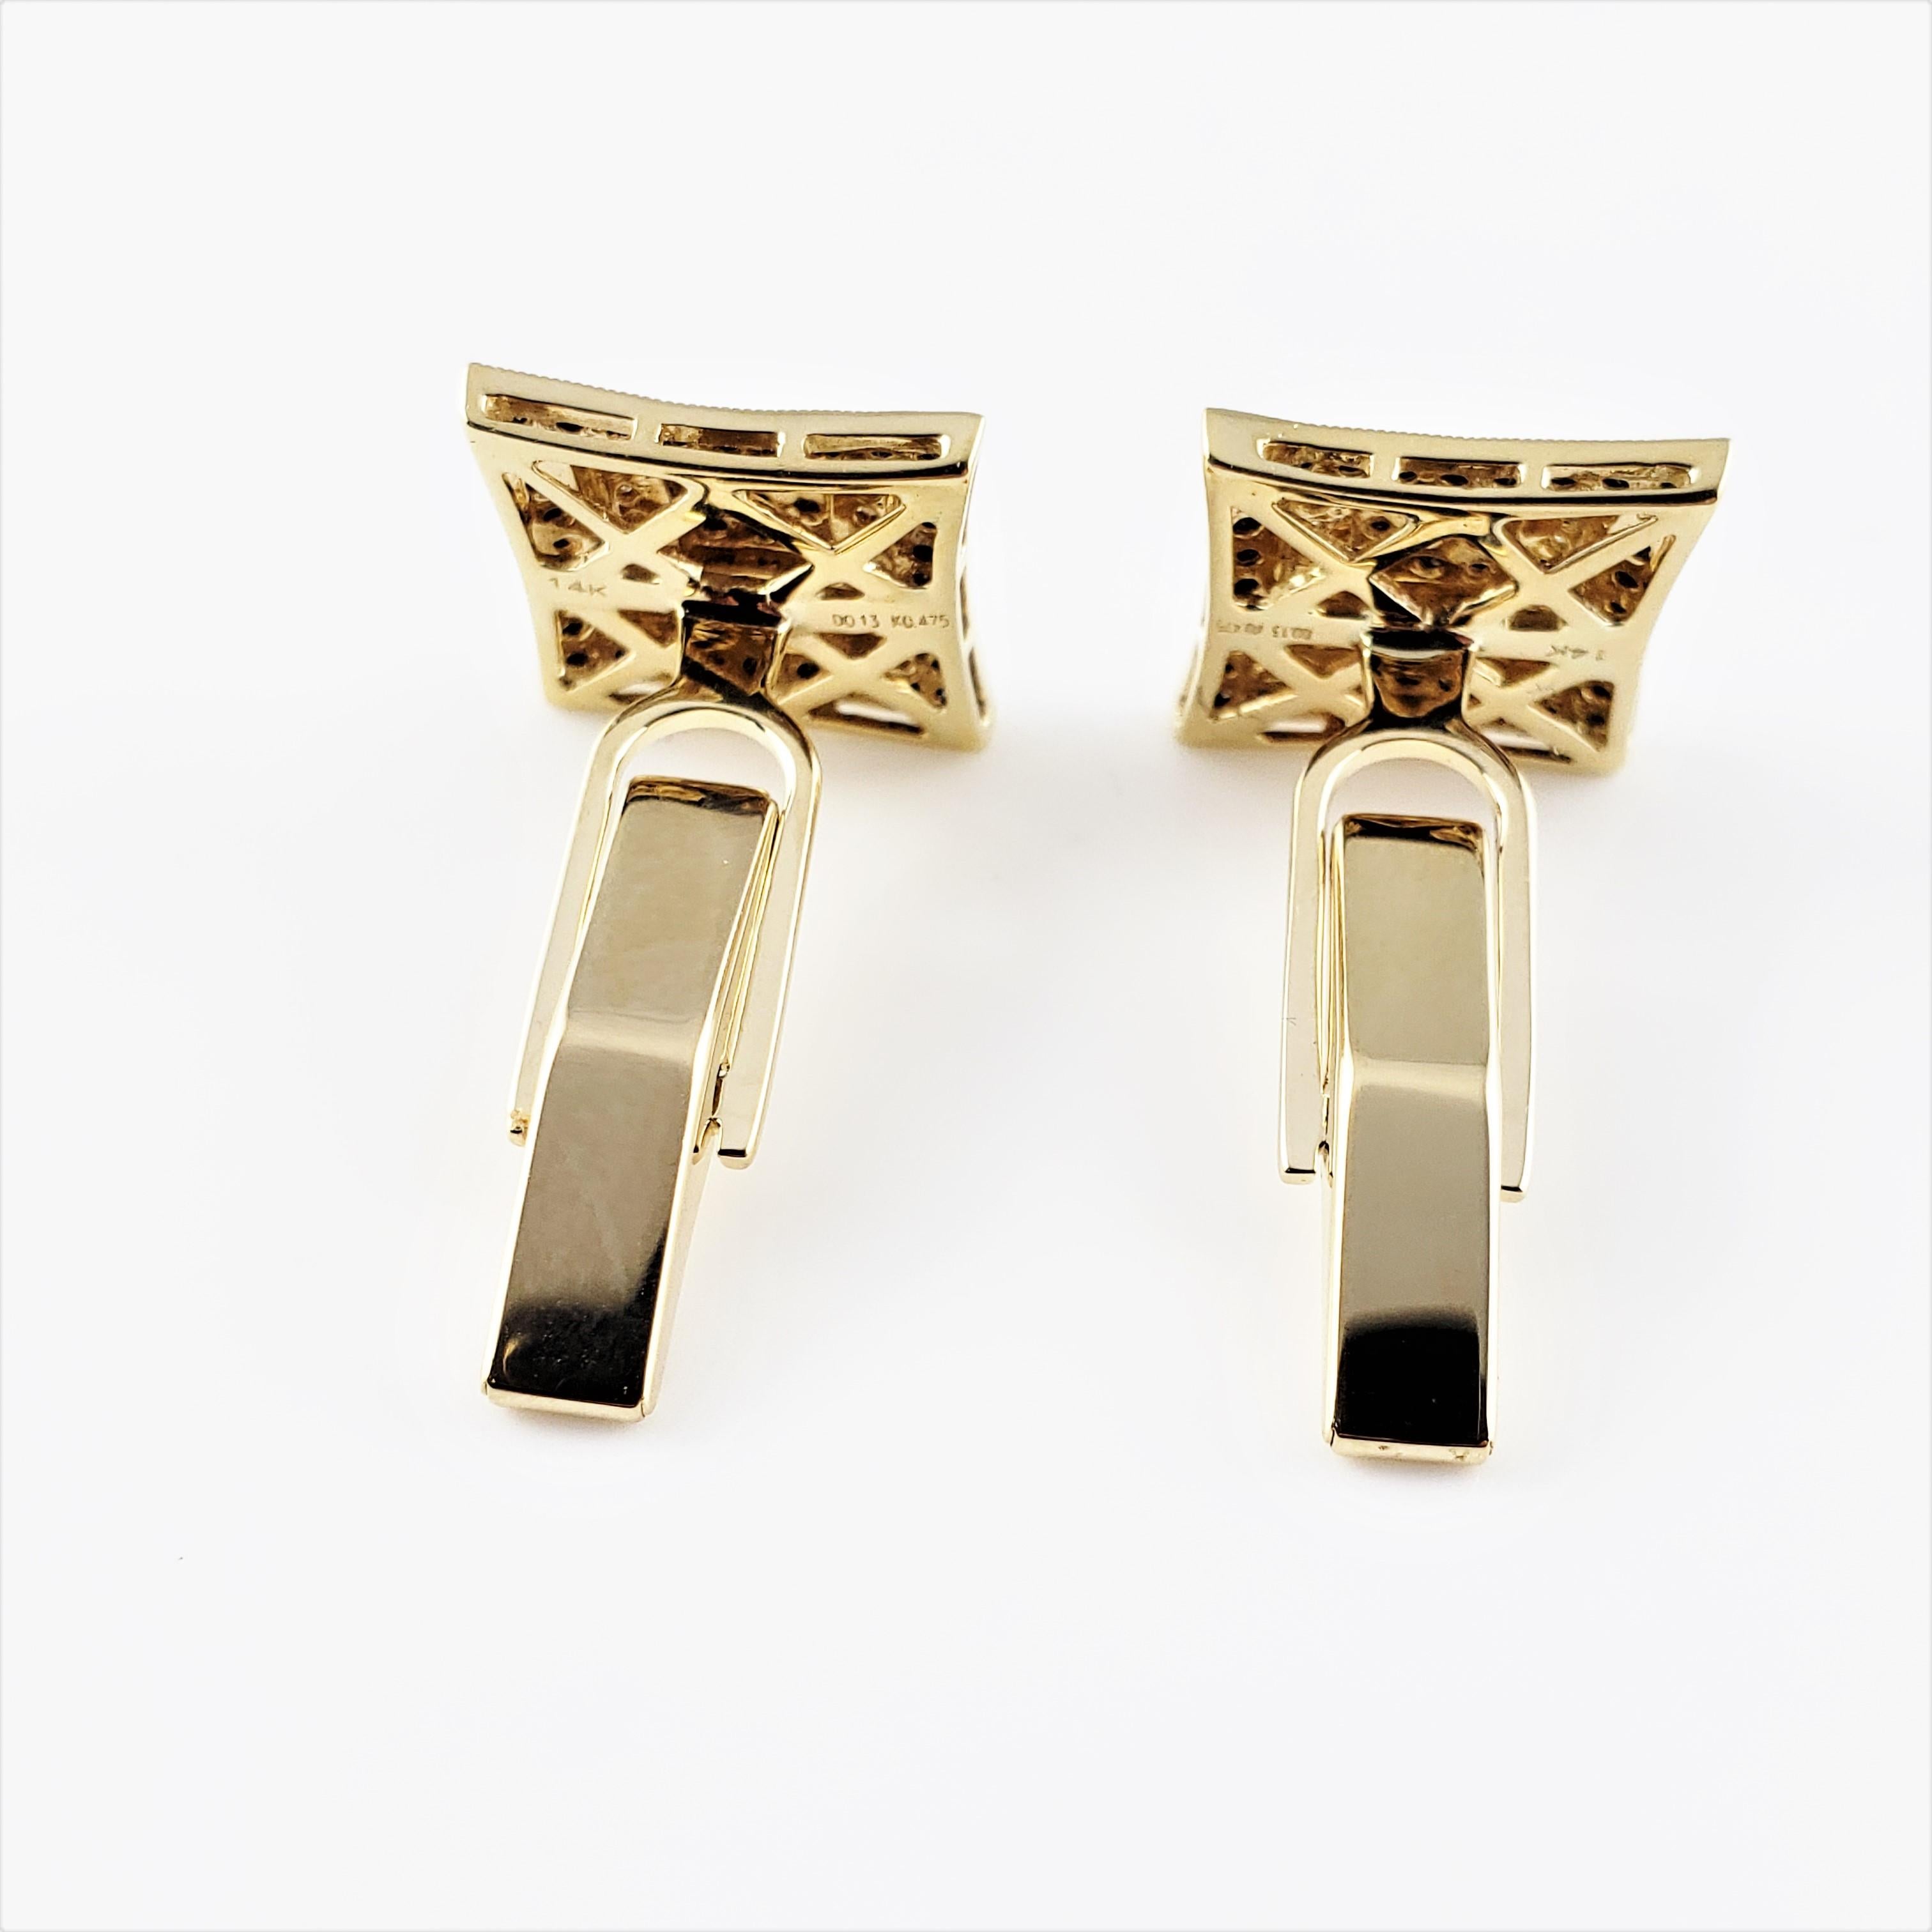 Vintage 14 Karat Yellow and White Gold Black and White Diamond Cufflinks-

These elegant cufflinks each feature 41 round black single cut diamonds and 24 round single cut diamonds set in classic 14K white and yellow gold.

Approximate total diamond